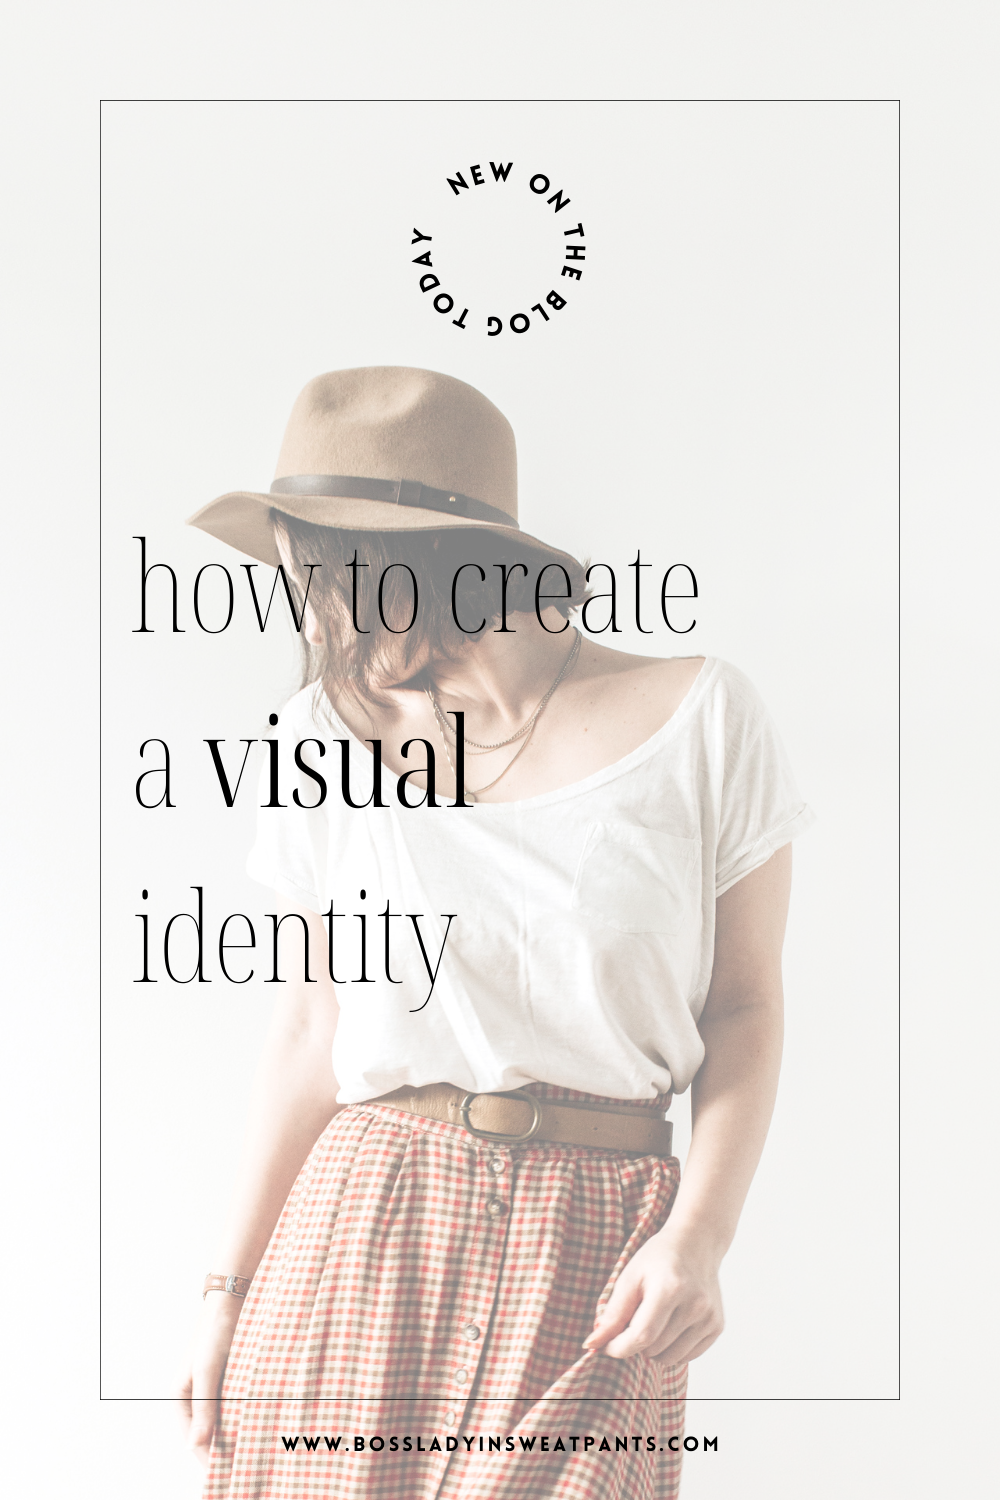 You have the power to control how people perceive you, all through your visual branding and personal style.